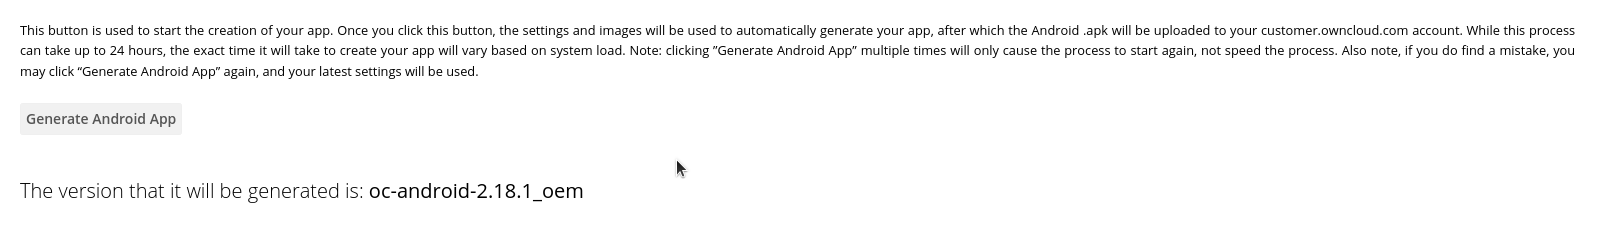 Android generate button